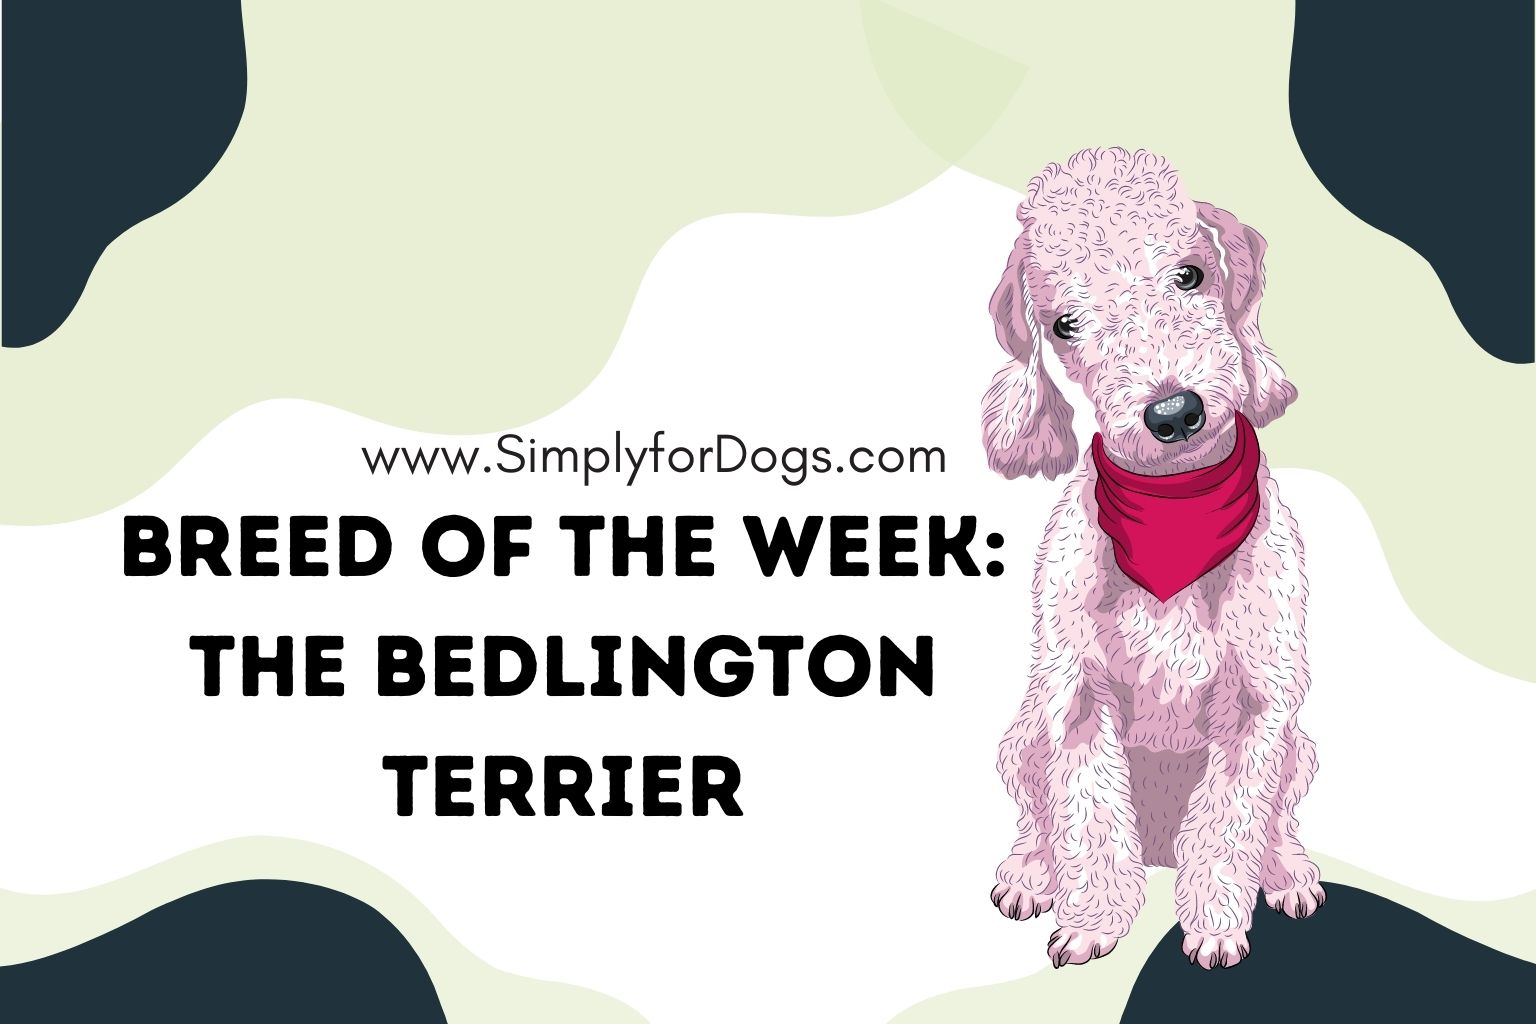 Breed of the Week: The Bedlington Terrier (Everything You Need to Know